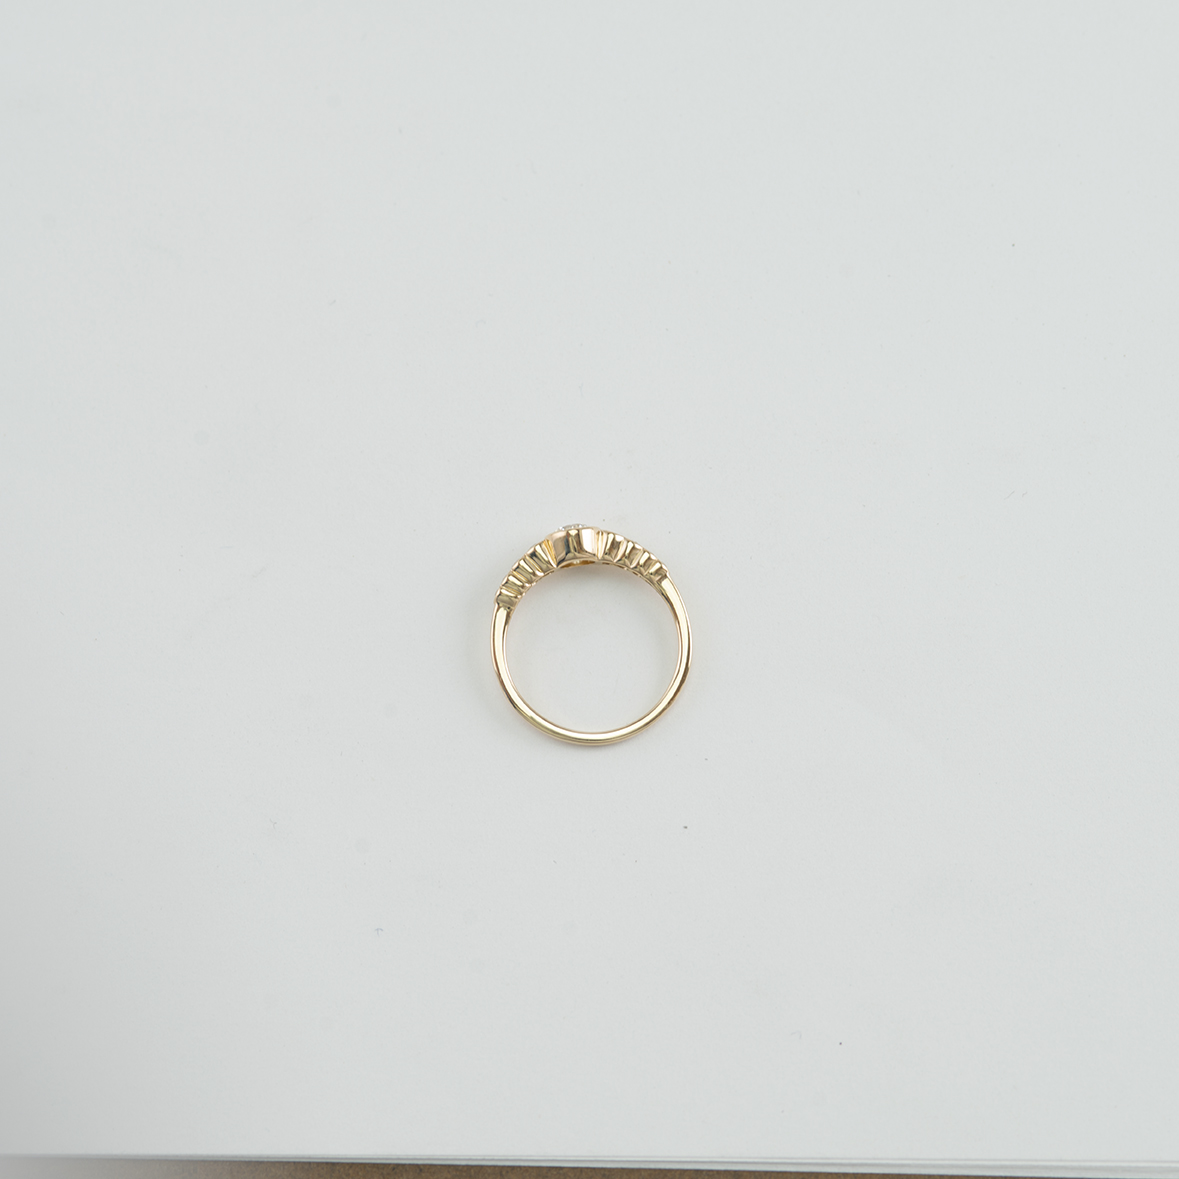 This white diamond ring has been set in 14kt yellow gold.